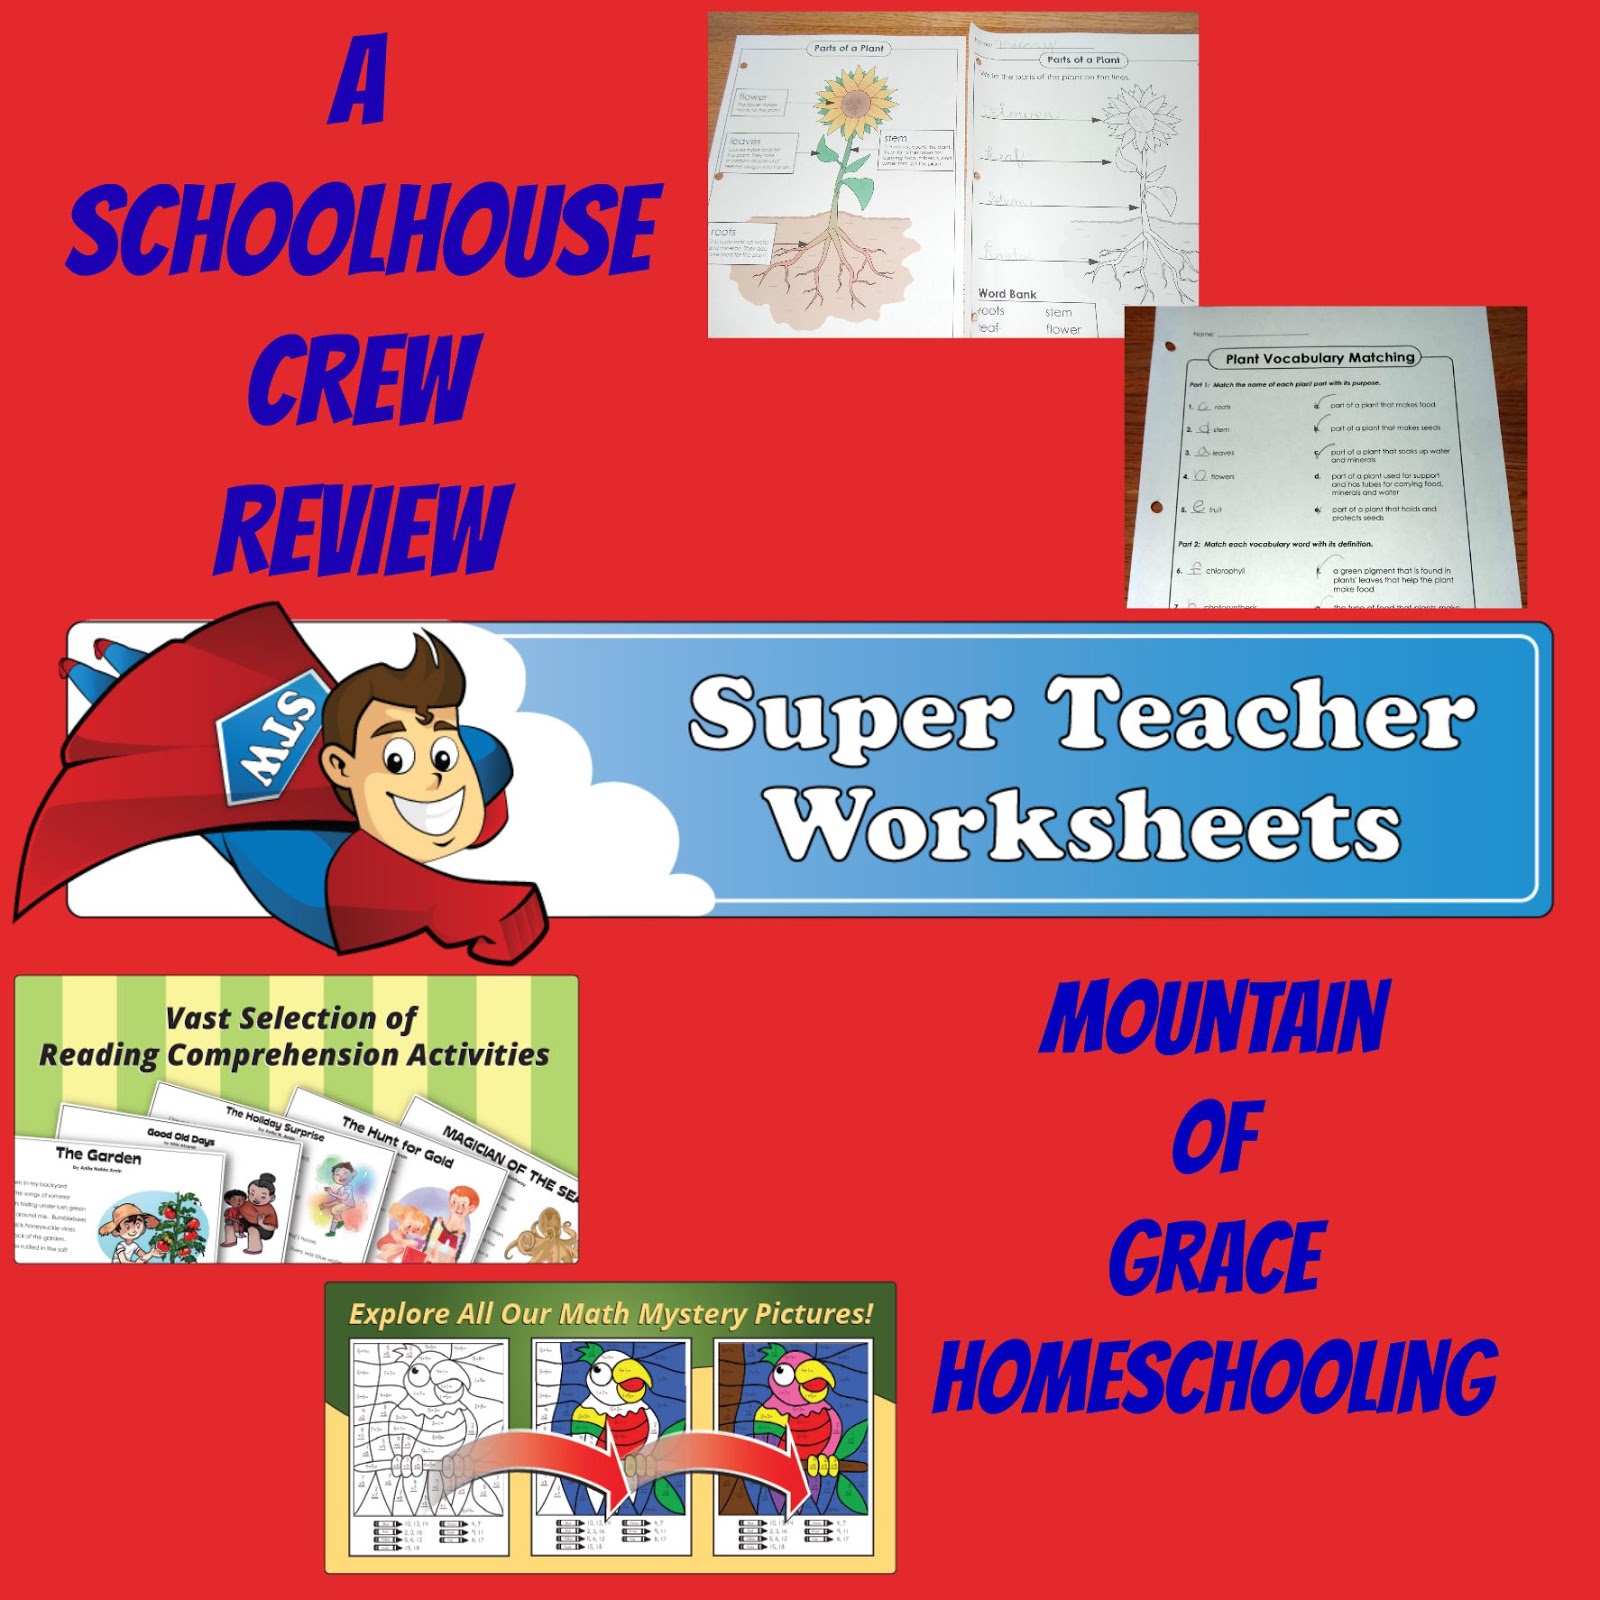 mountain-of-grace-homeschooling-tos-review-for-super-teacher-worksheets